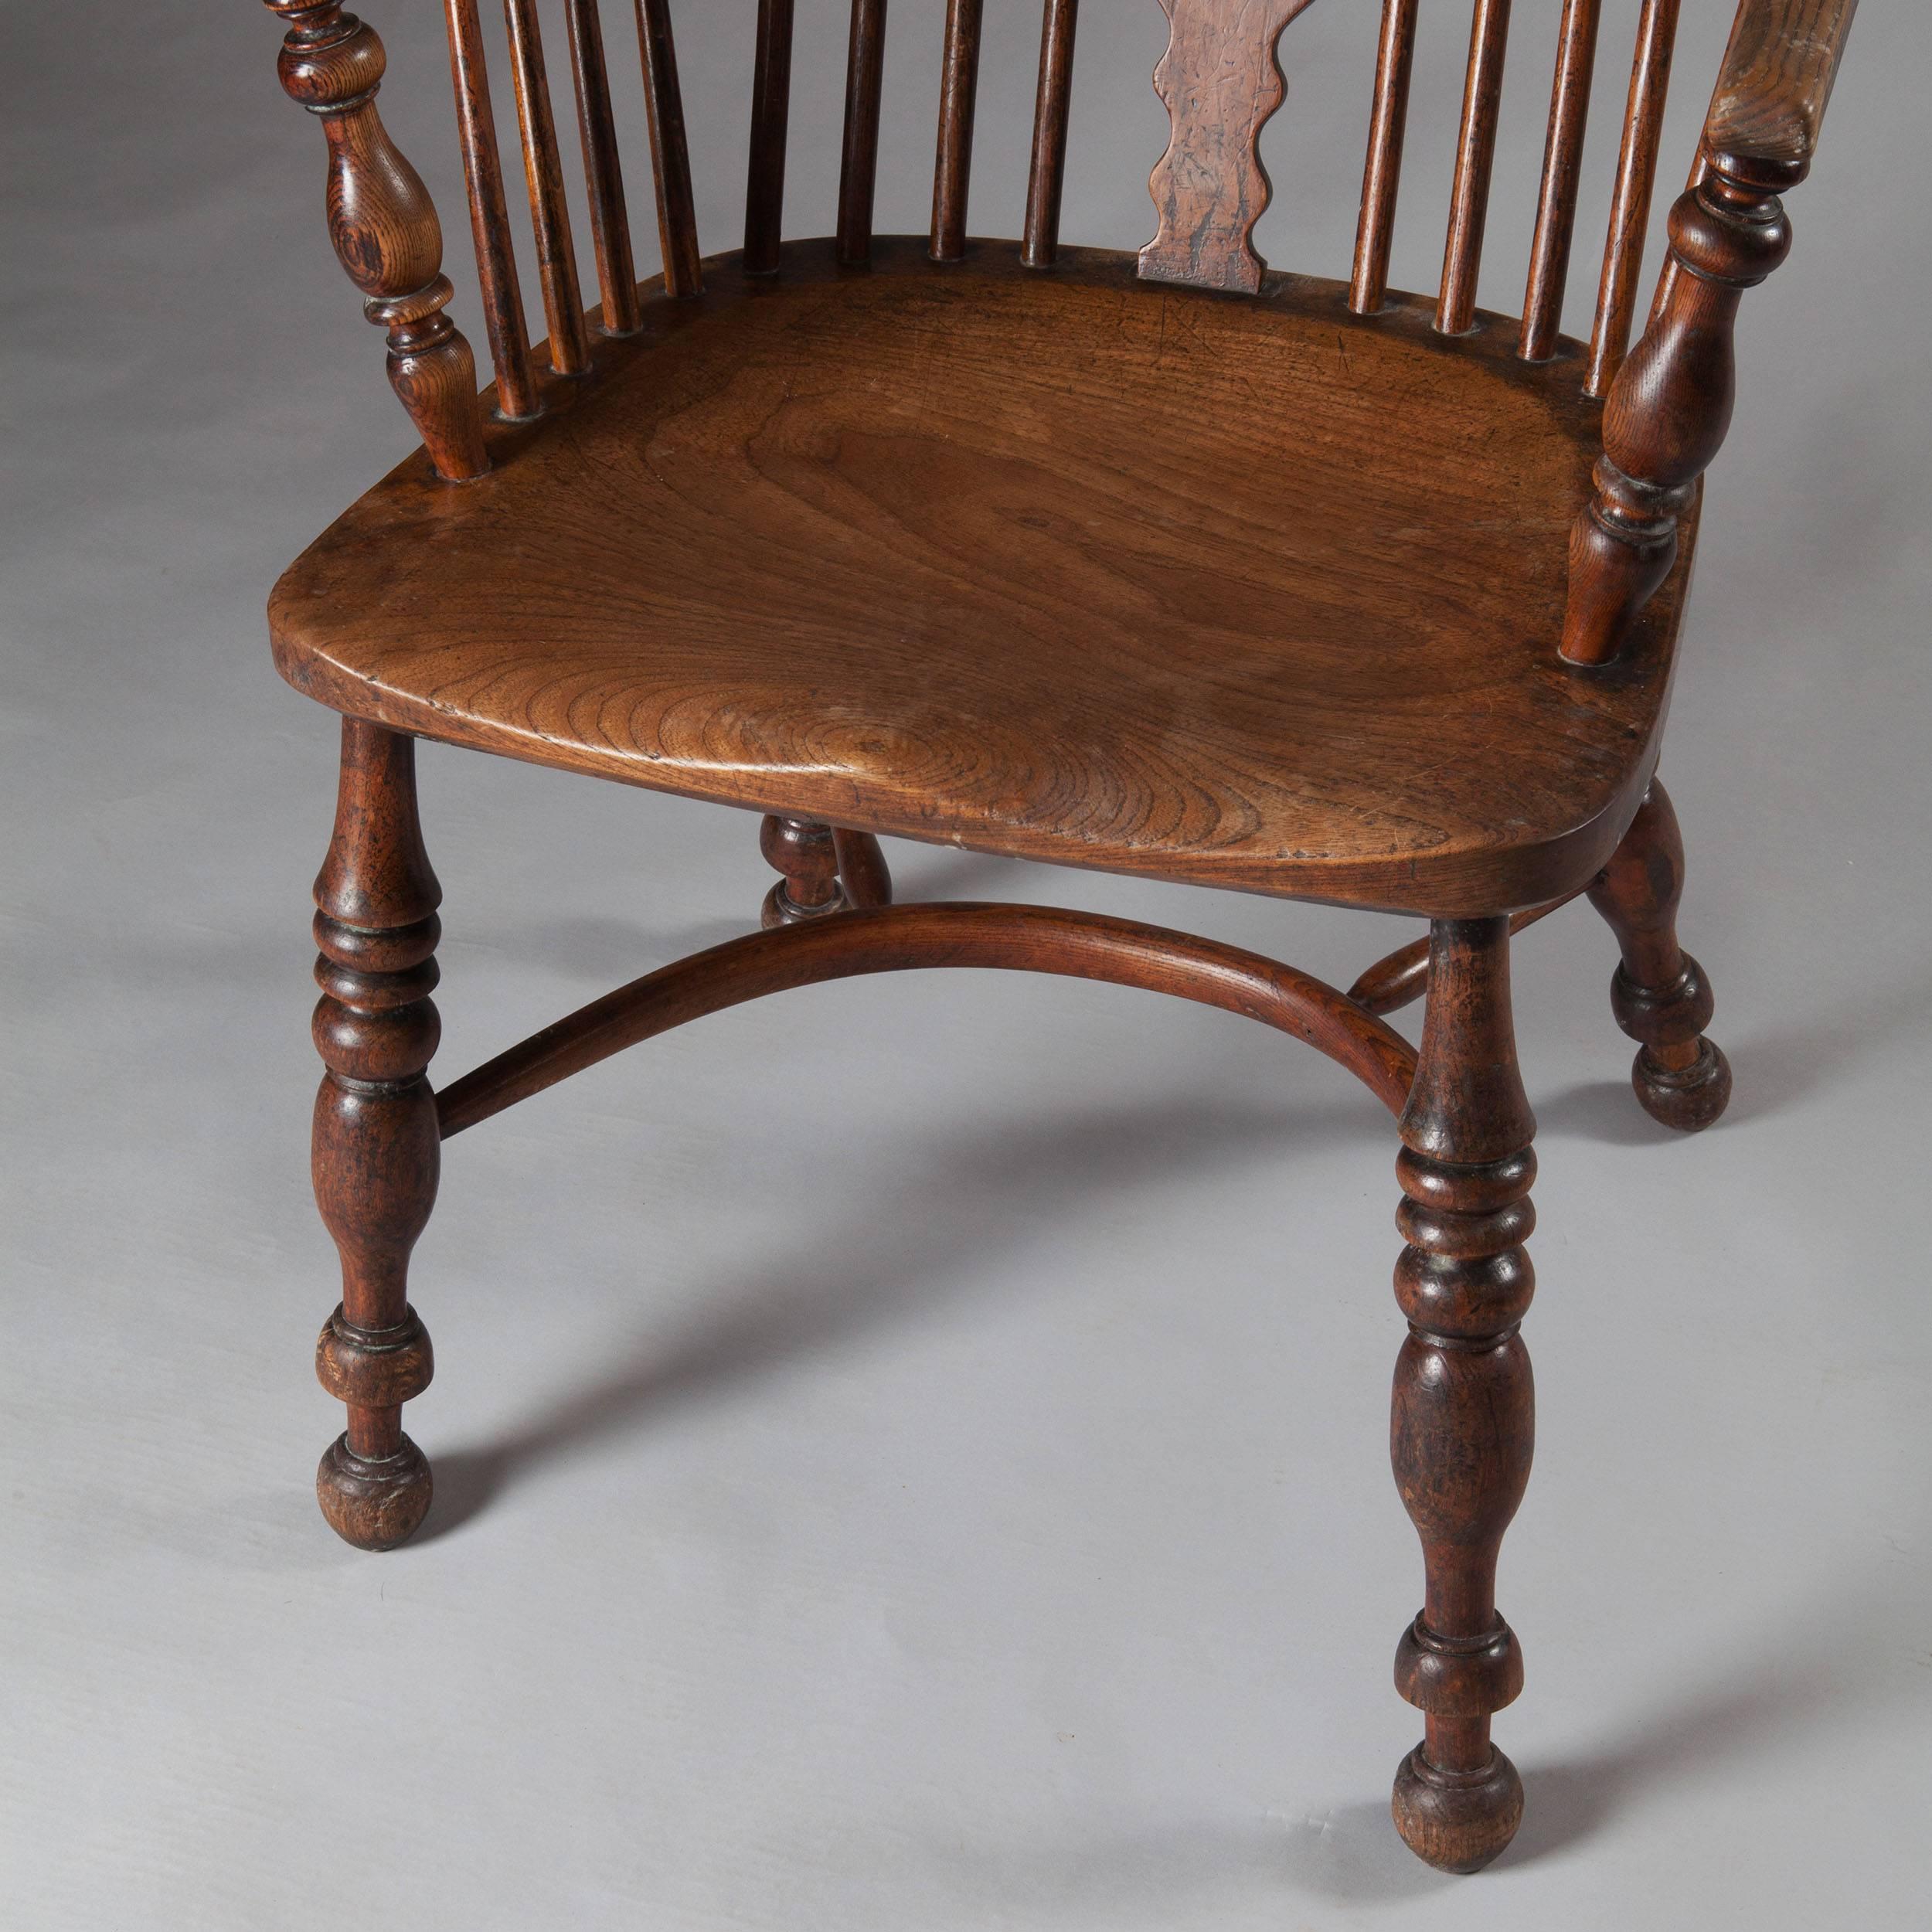 Early 19th century Yew-wood Windsor armchair with crinoline stretcher, well figured.

Measures: Height 118cm.
Width 63cm.
Depth 54cm.
​Seat Height 46cm.

The Windsor chair is established as one of the great classics of English country